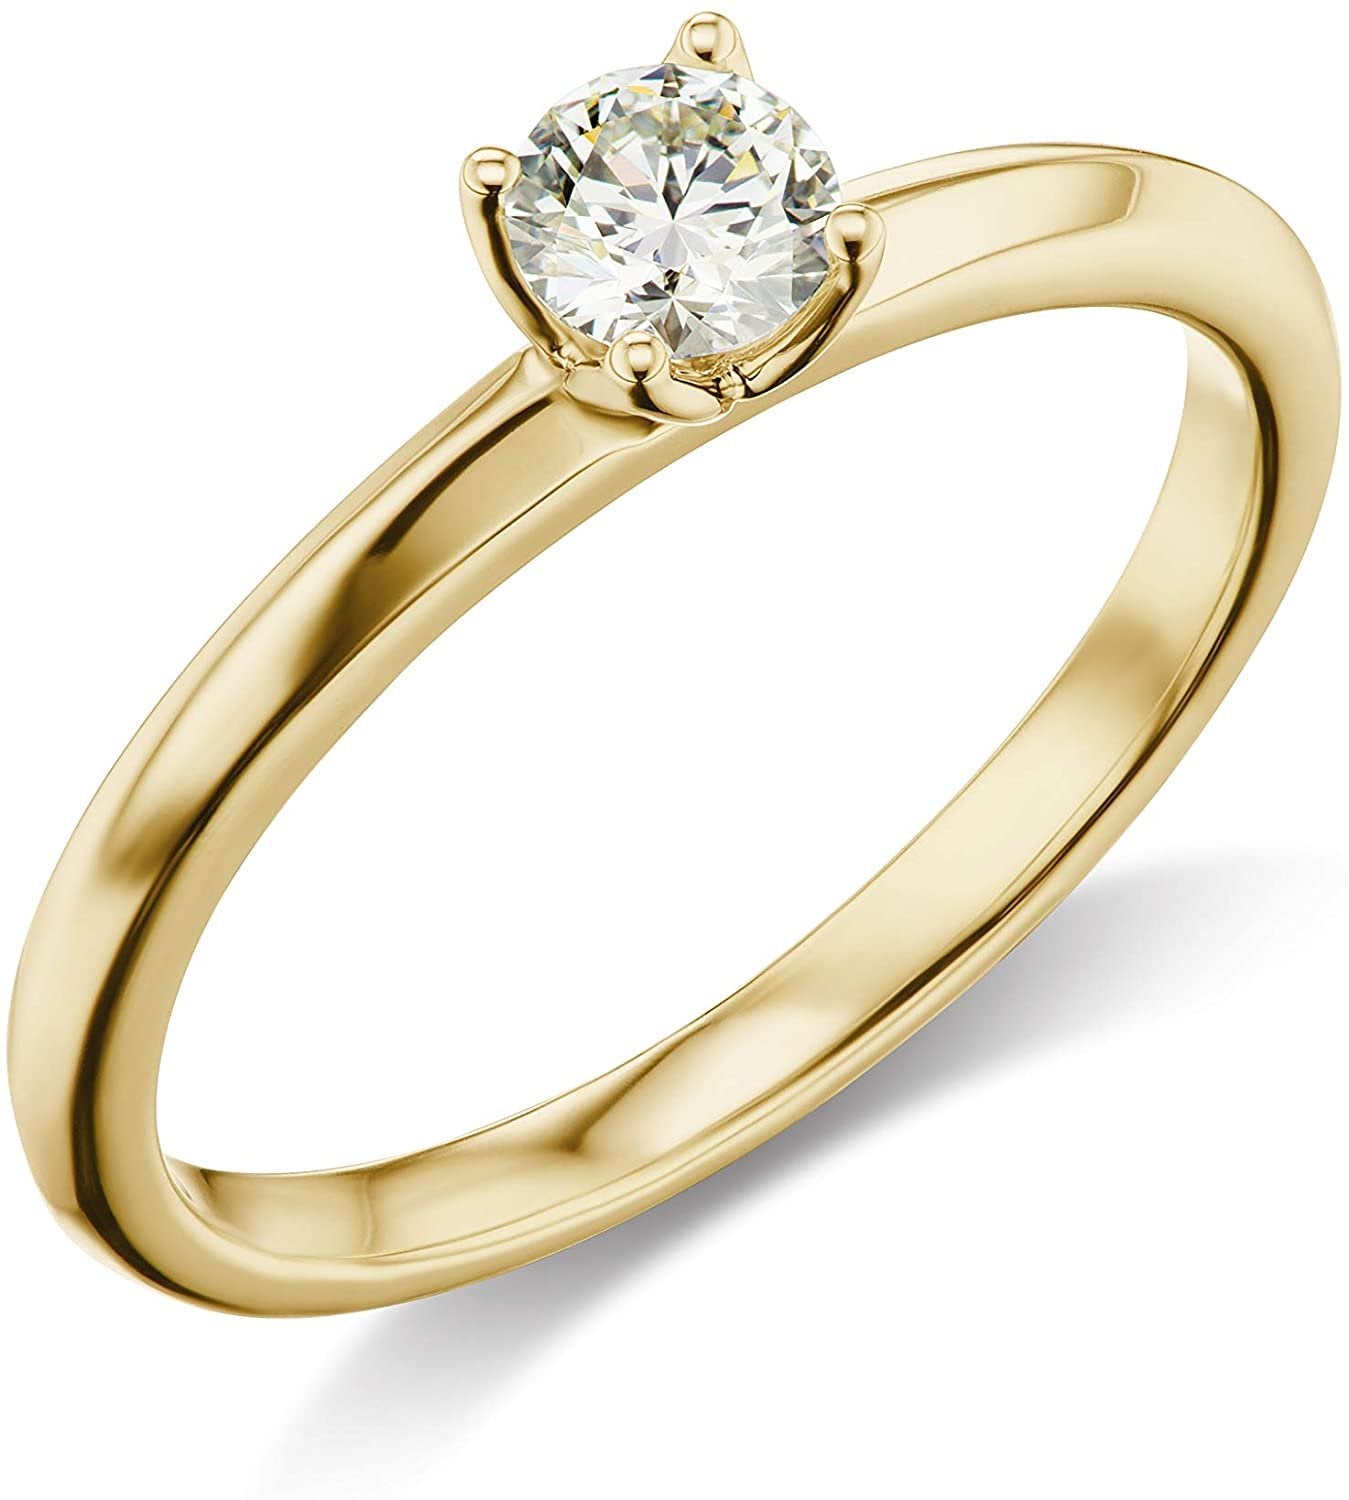 14K Yellow Gold 1/3 Carat Round Brilliant Lab Created Diamond 4-Prong Classic Solitaire Engagement Ring (G-H Color, VS1-VS2 Clarity) - Size 6.5